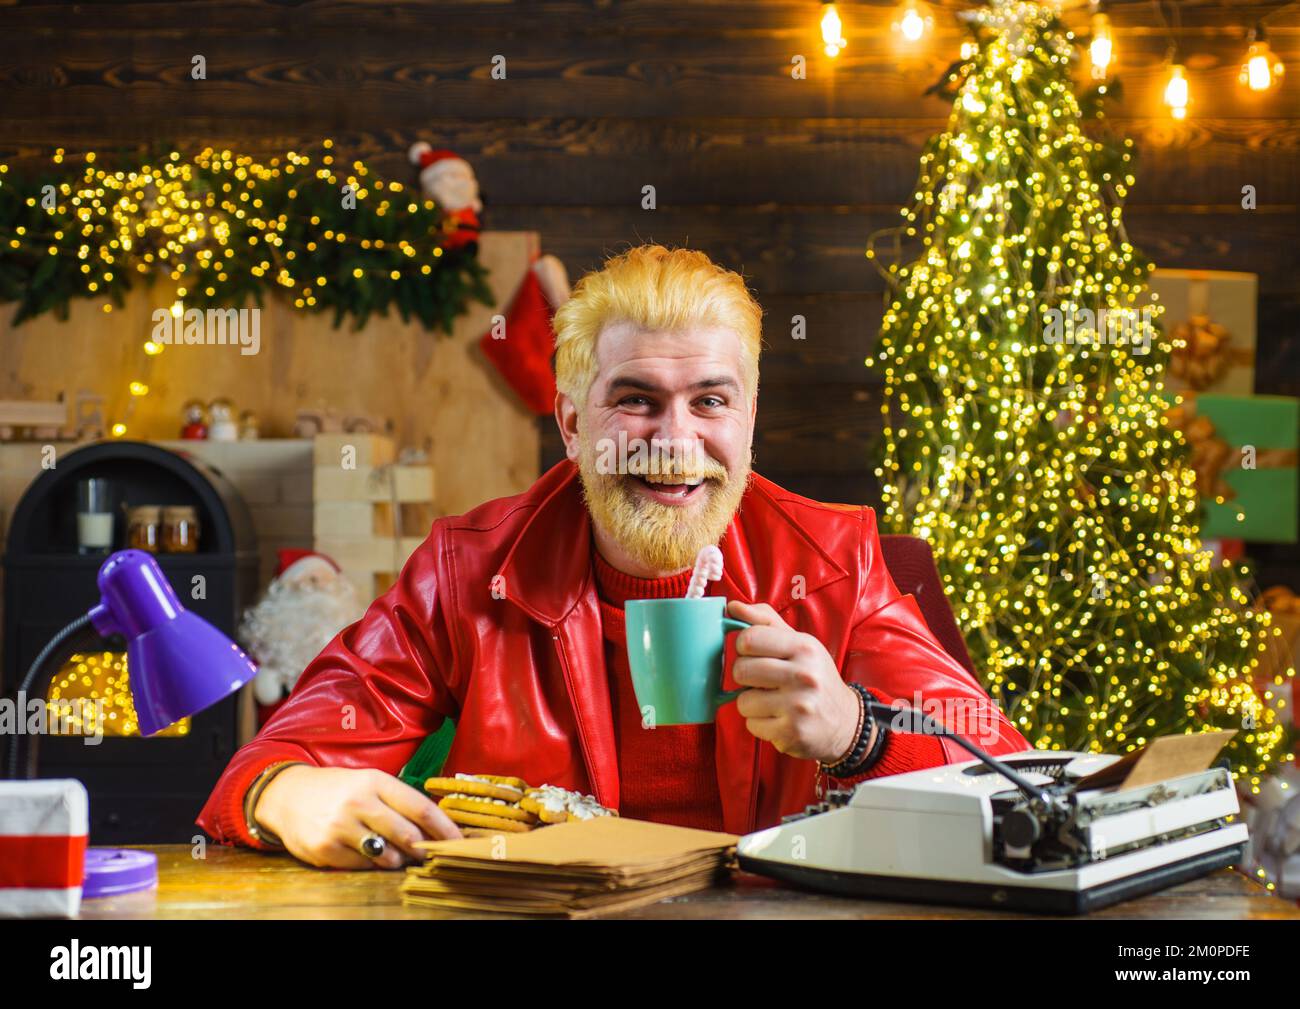 Smiling man in red leather jacket with mug of milk and cookie. Merry Christmas. New year background. Stock Photo